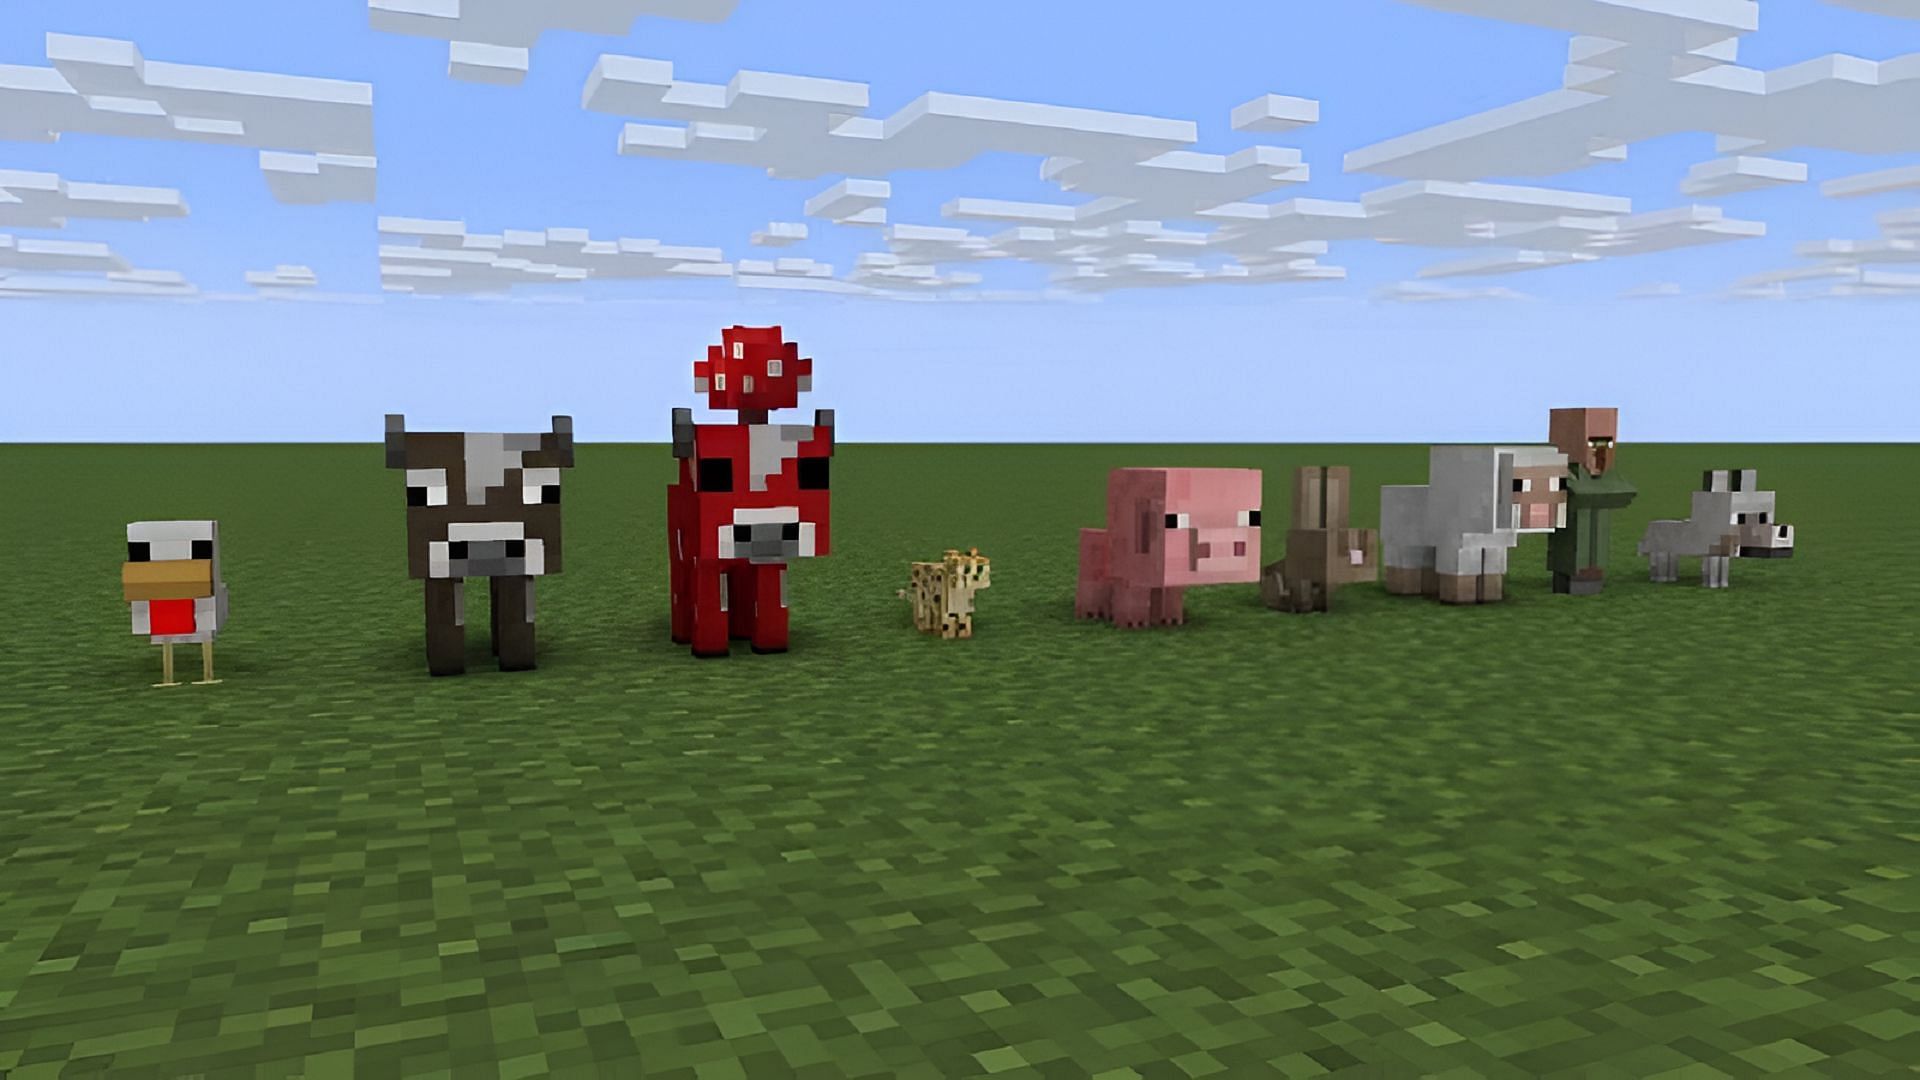 Different baby mobs as they